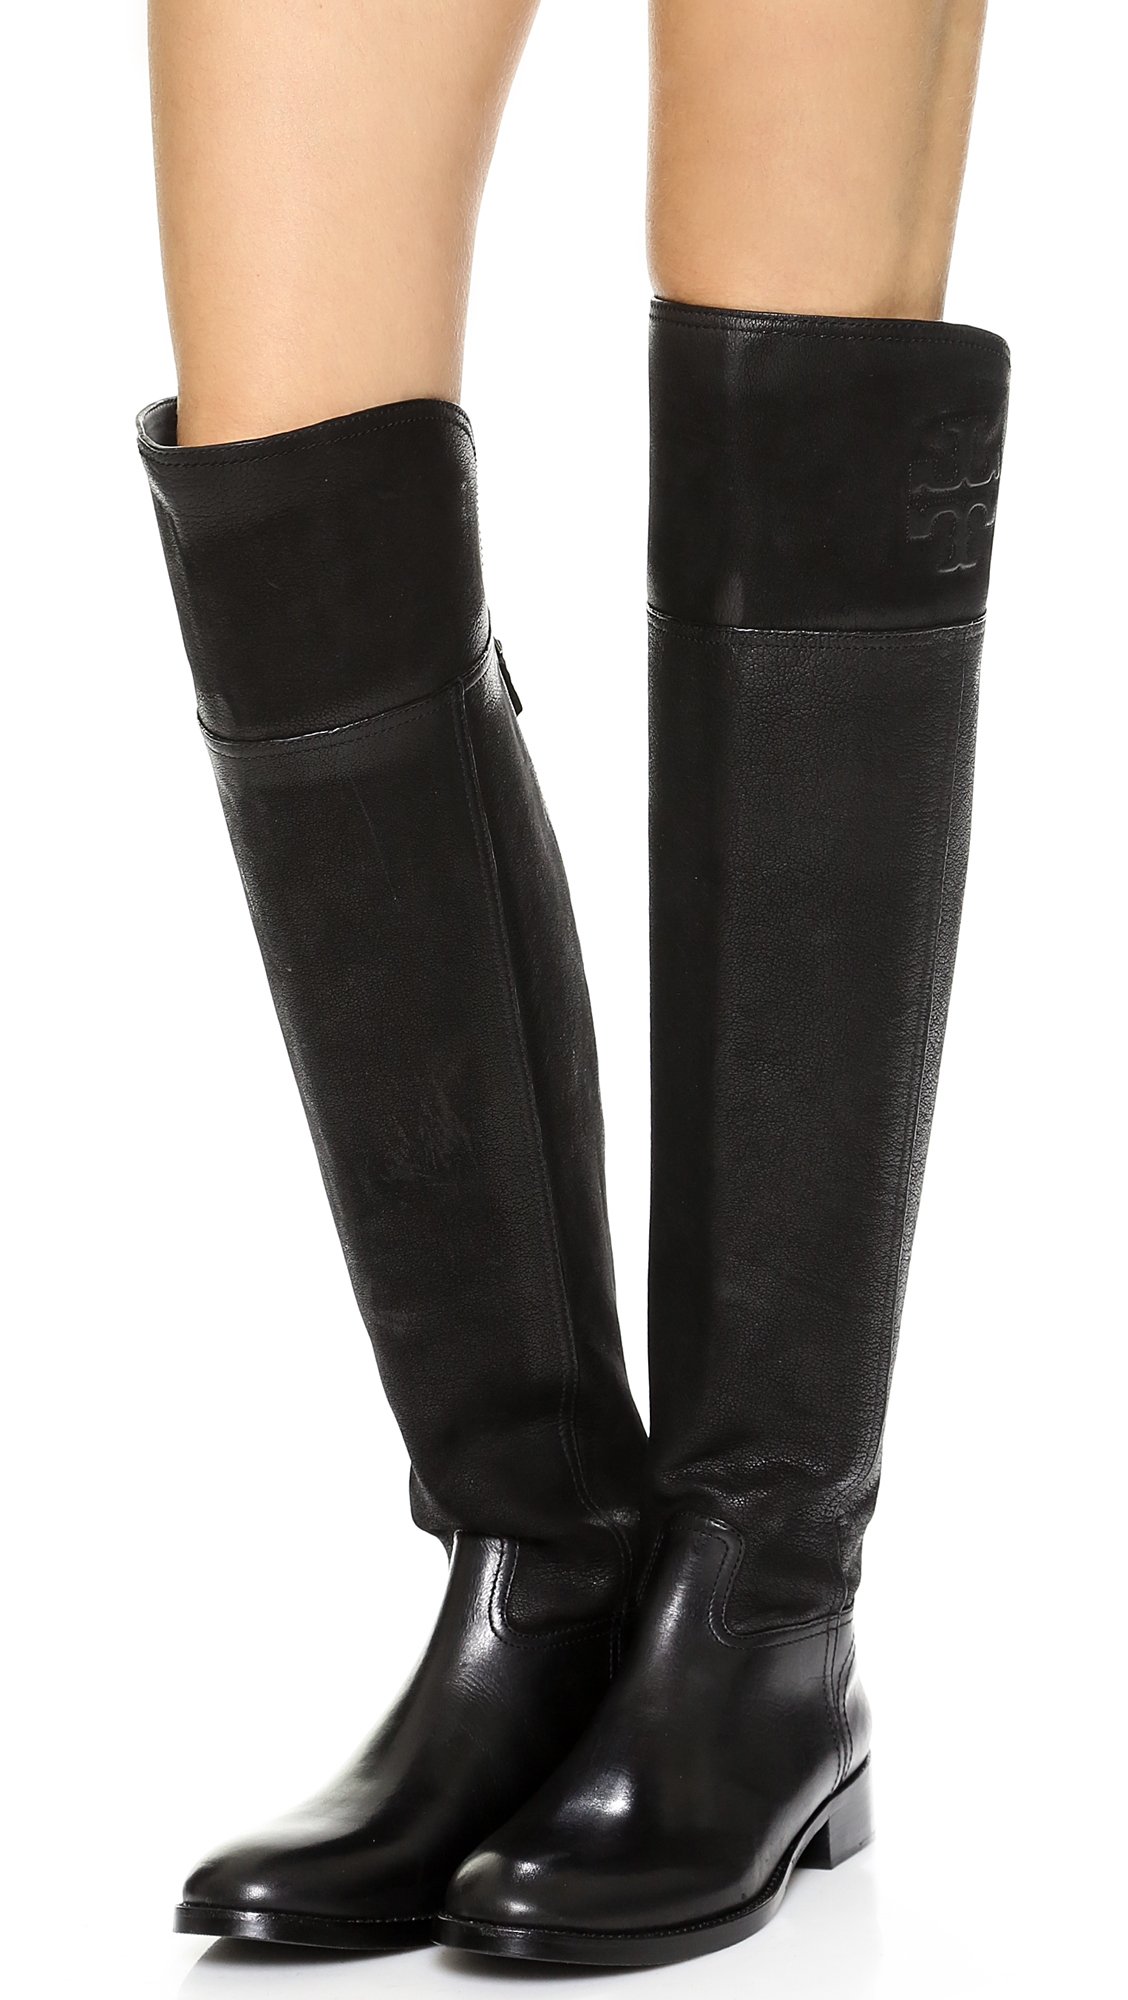 Tory burch Simone Over The Knee Flat Boots Black in Black | Lyst